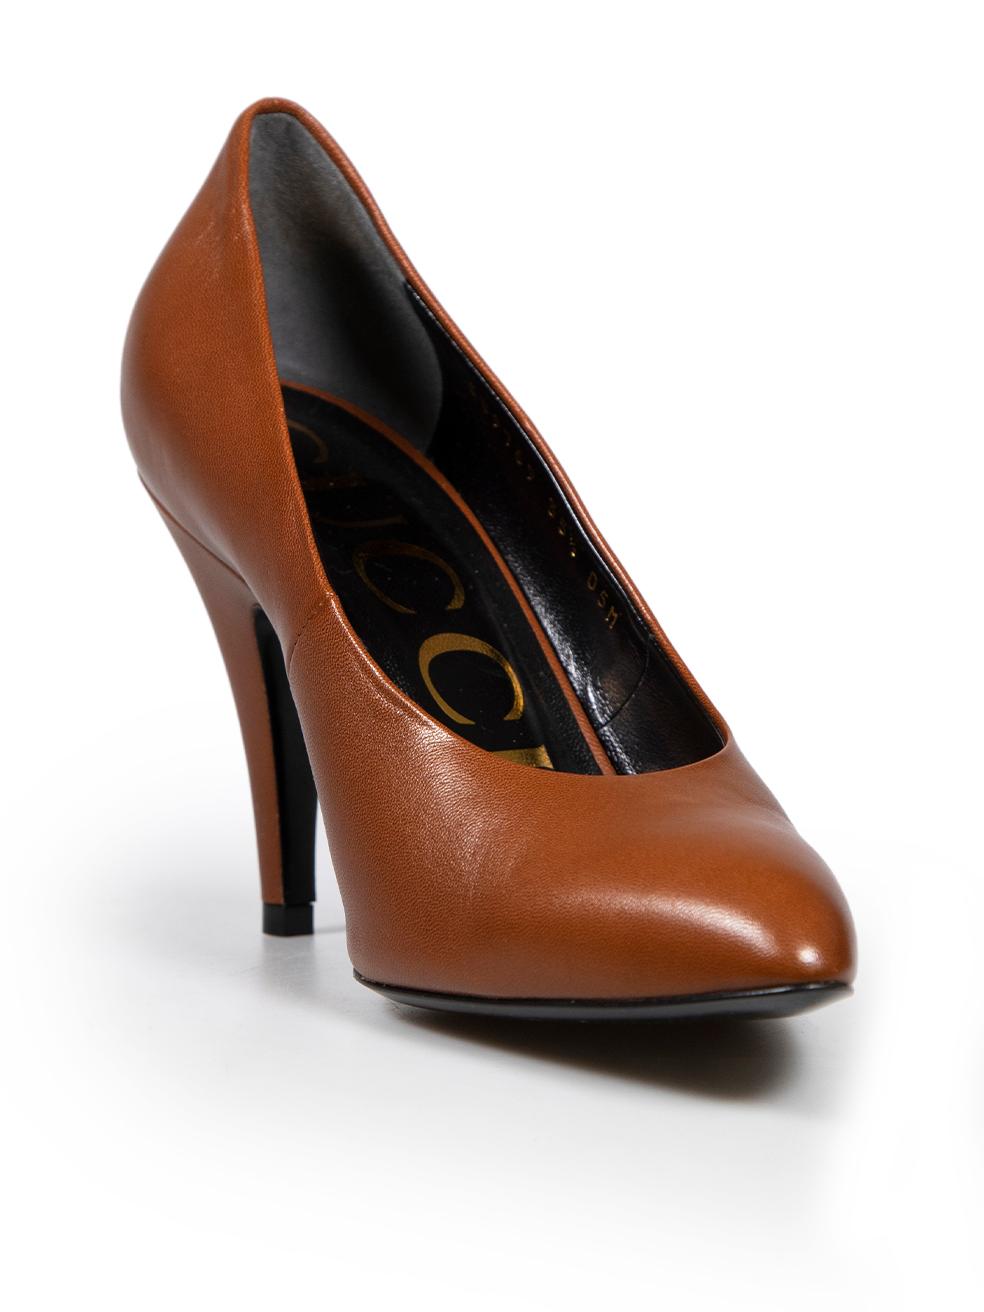 CONDITION is Very good. Minimal wear to heels is evident. Minimal wear to soles on this used Gucci designer resale item.
 
 
 
 Details
 
 
 Brown
 
 Leather
 
 Slip on pumps
 
 Pointed toe
 
 Mid heel
 
 
 
 
 
 Made in Italy
 
 
 
 Composition
 
